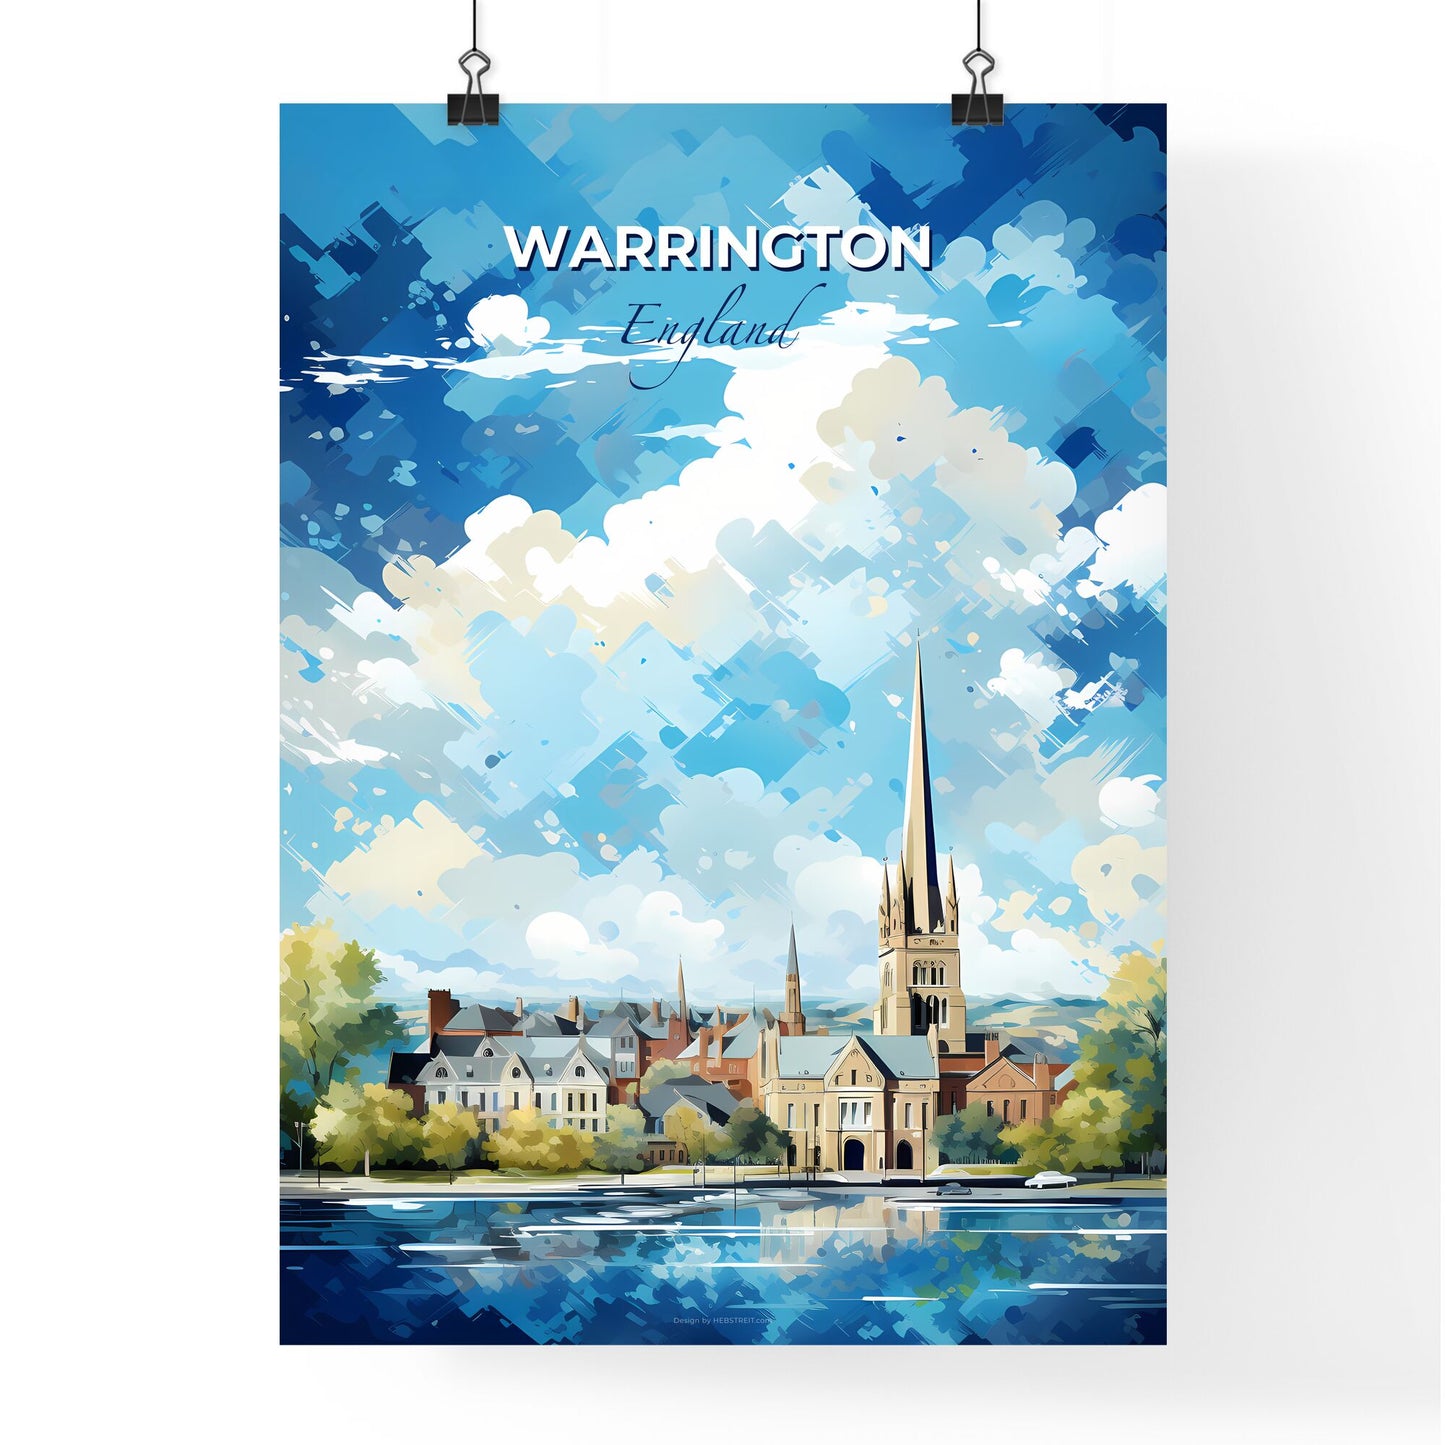 Warrington England Skyline - A City With A Tall Tower And Trees - Customizable Travel Gift Default Title